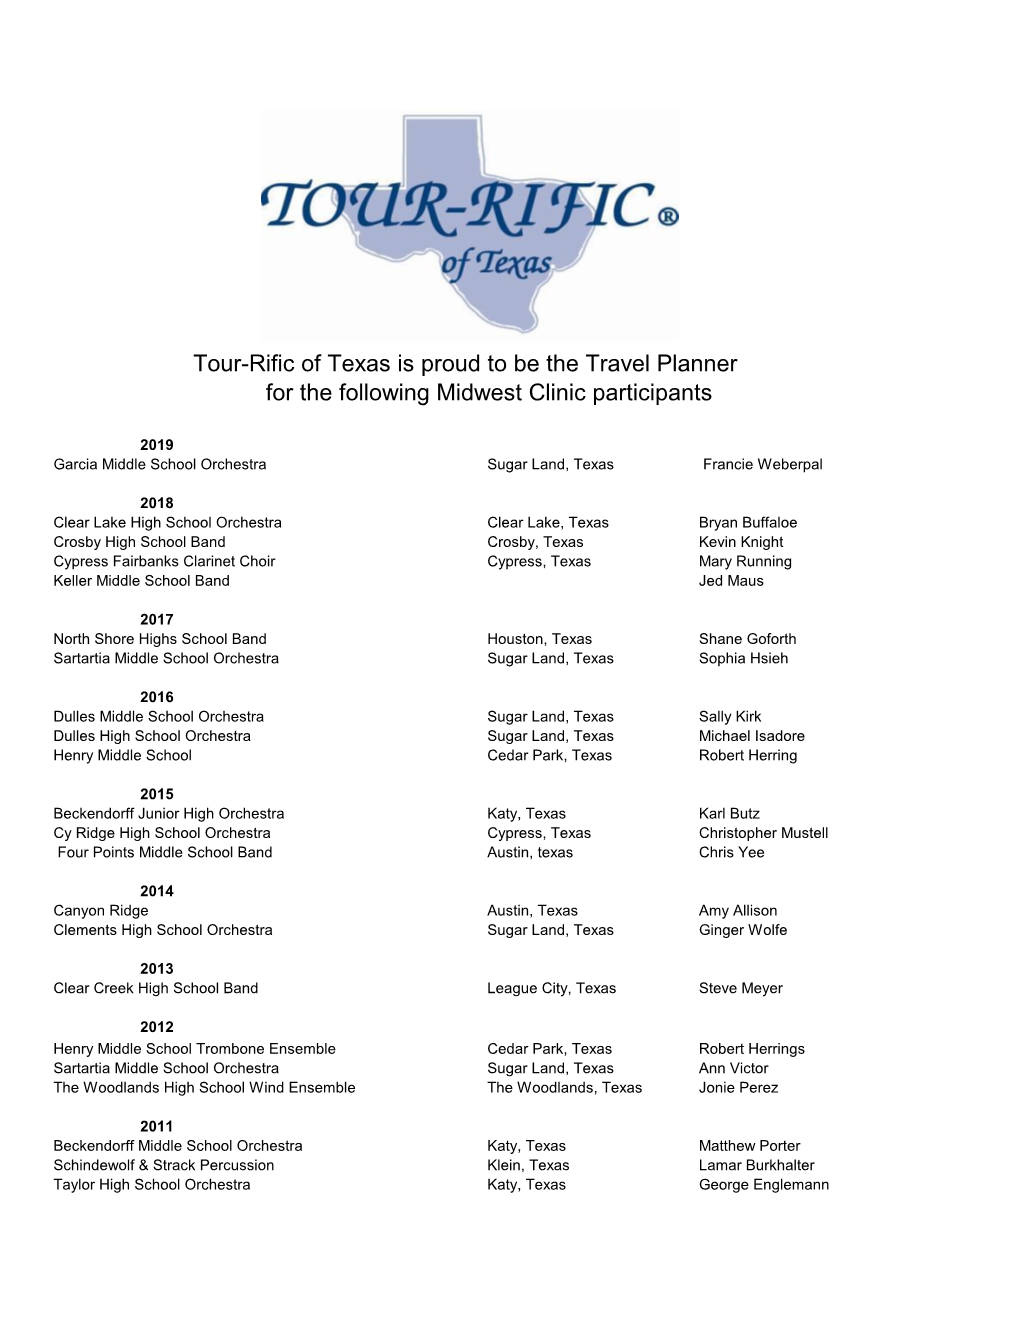 Tour-Rific of Texas Is Proud to Be the Travel Planner for the Following Midwest Clinic Participants